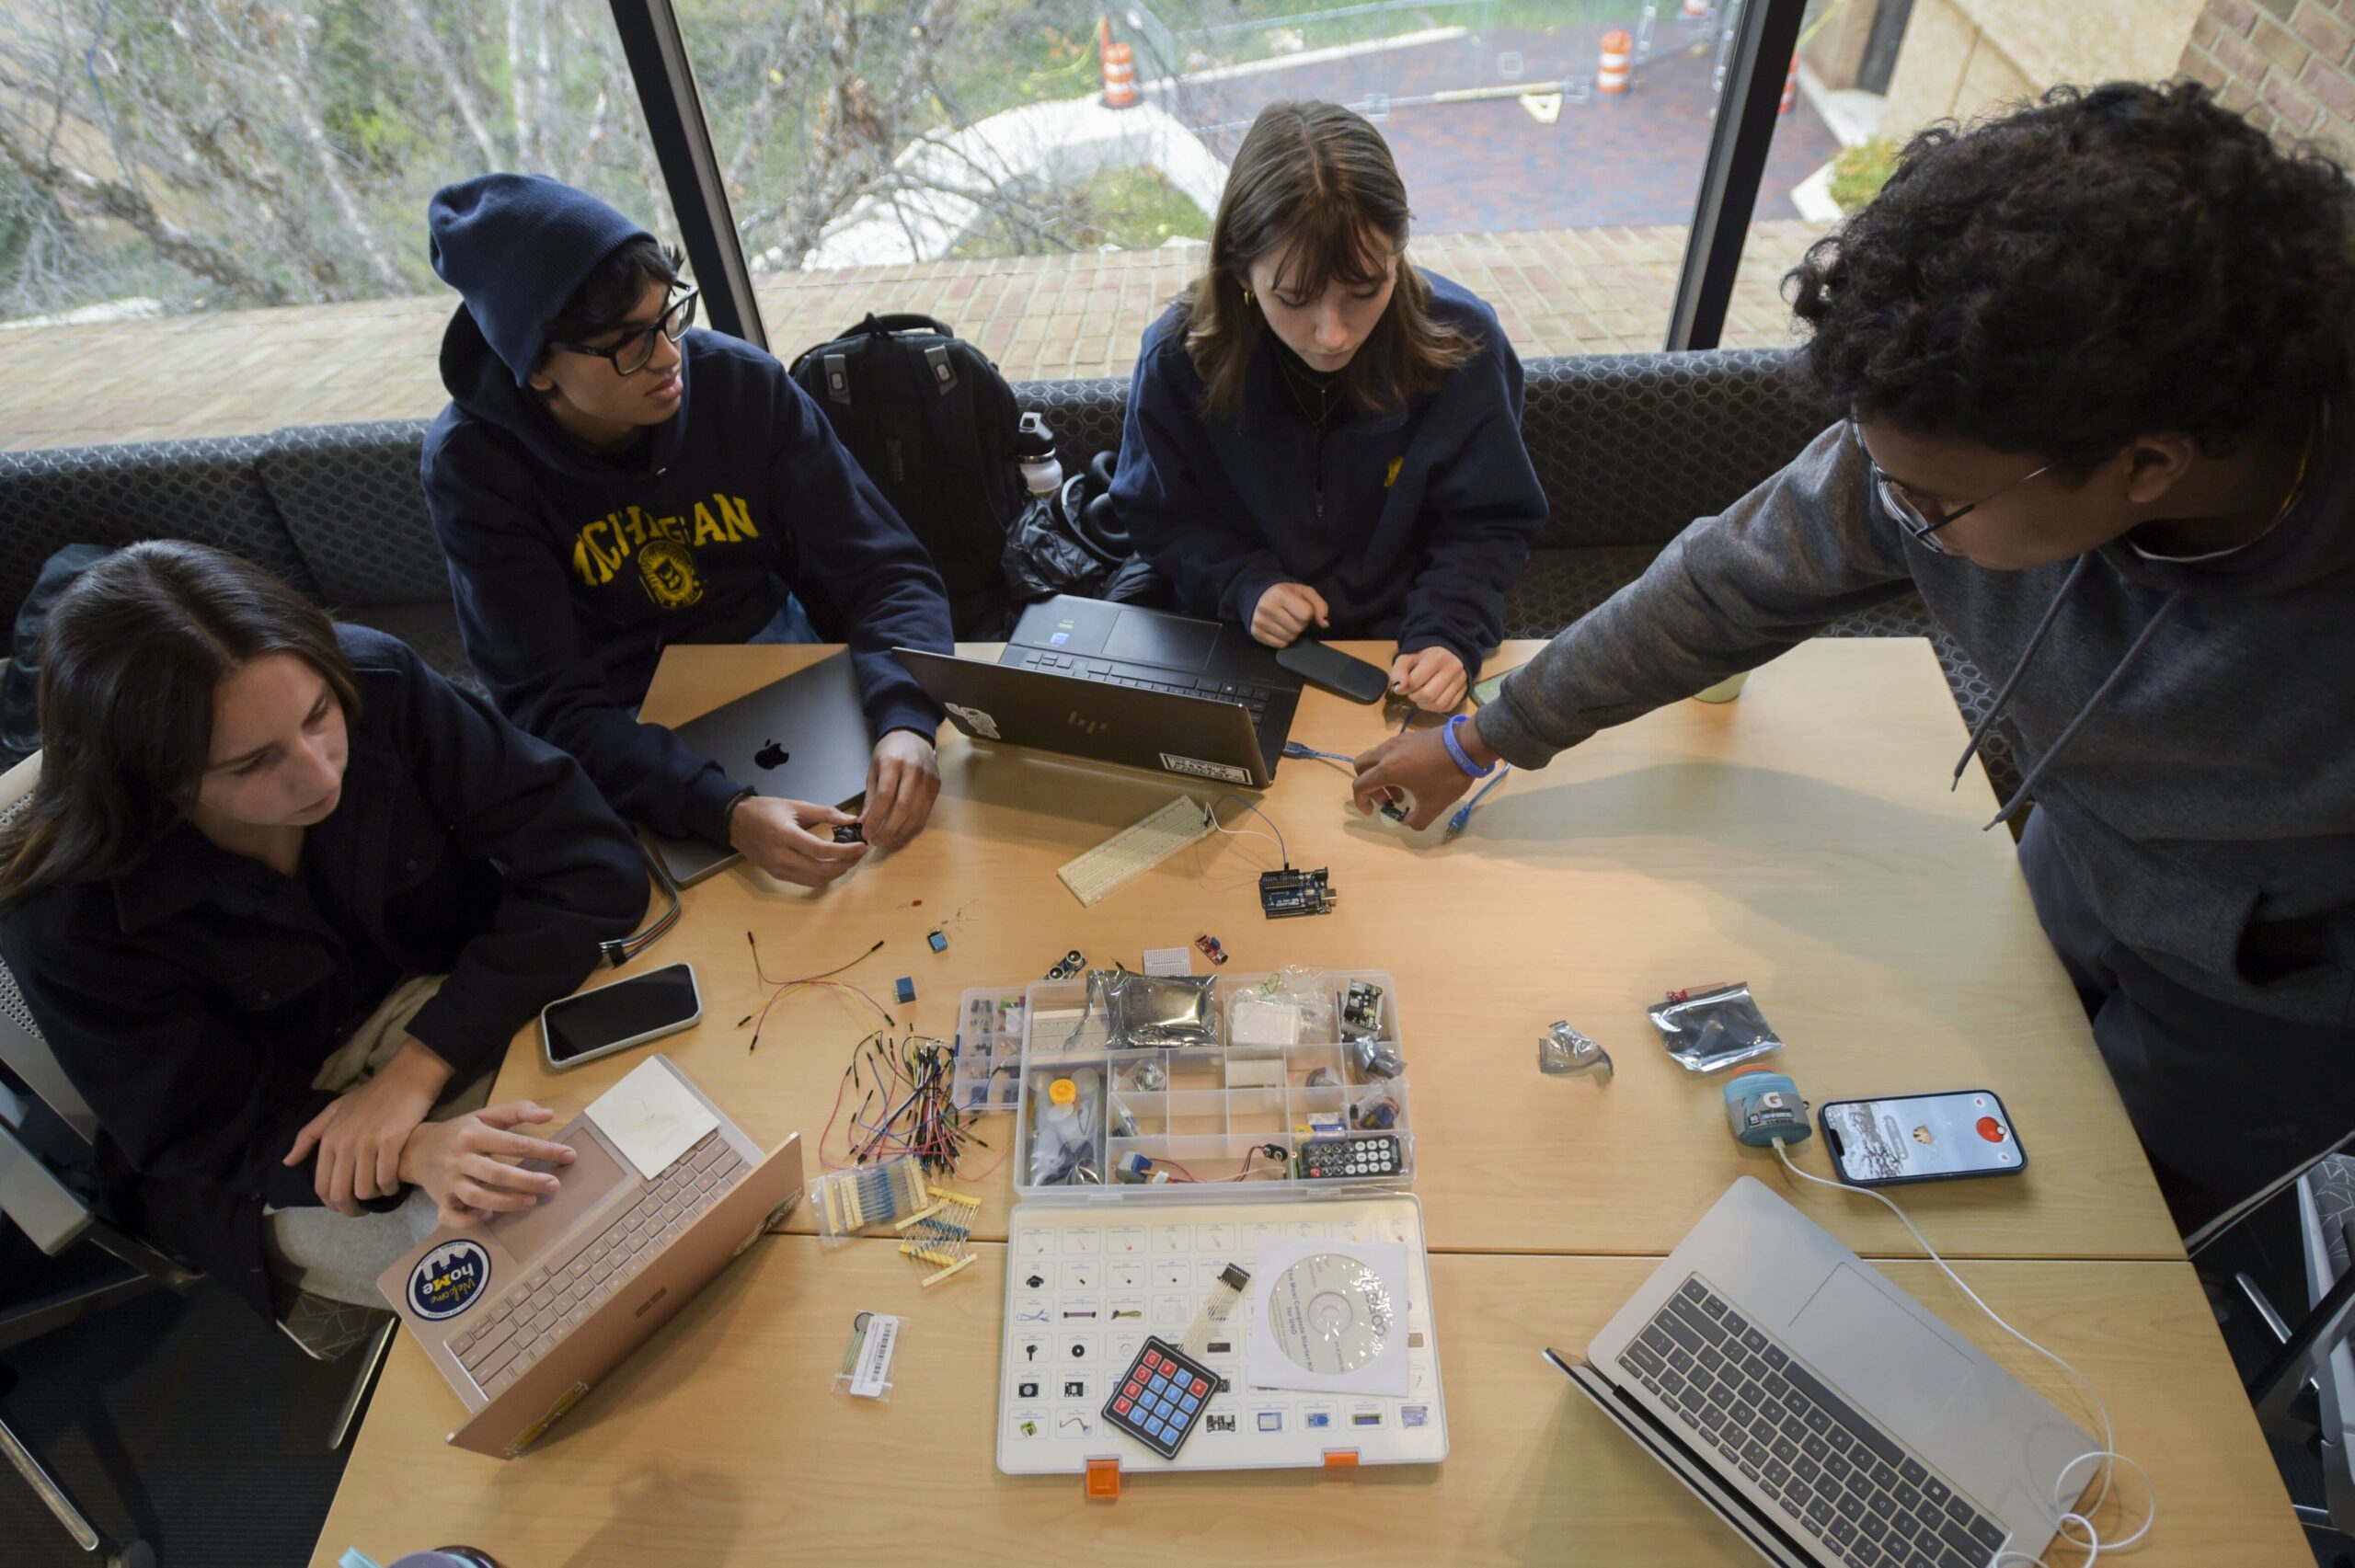 Aerial view of four students working on laptops with parts scattered on table